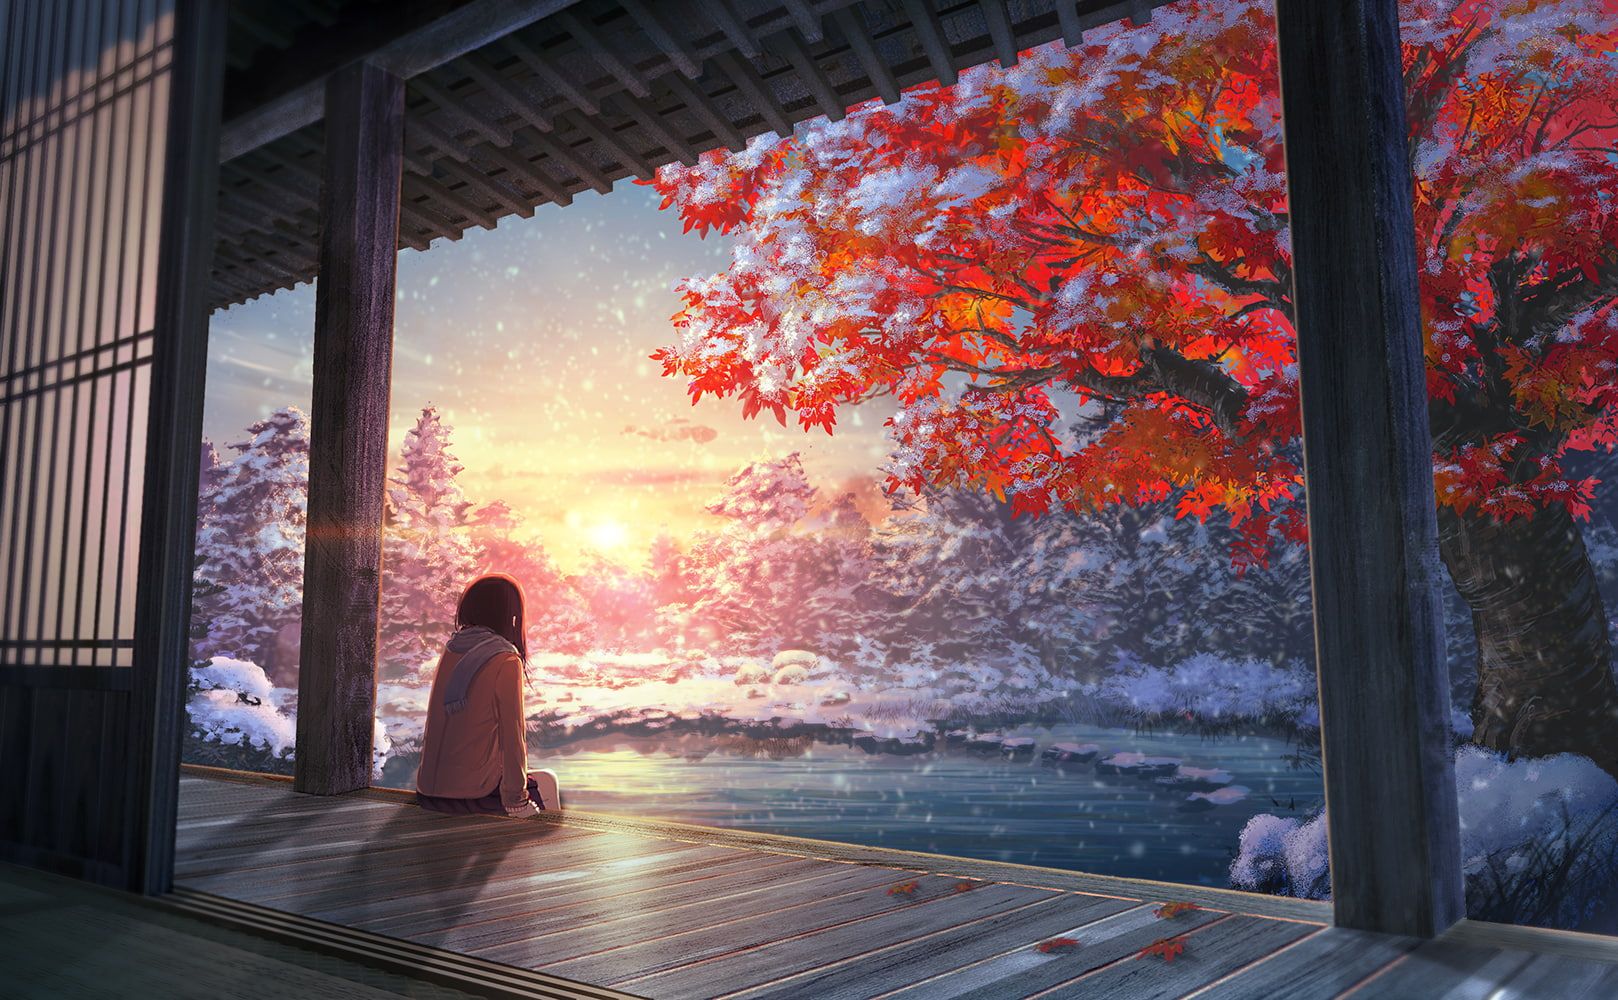 3072x1920px. free download. HD wallpaper: Chill Out, snow, anime